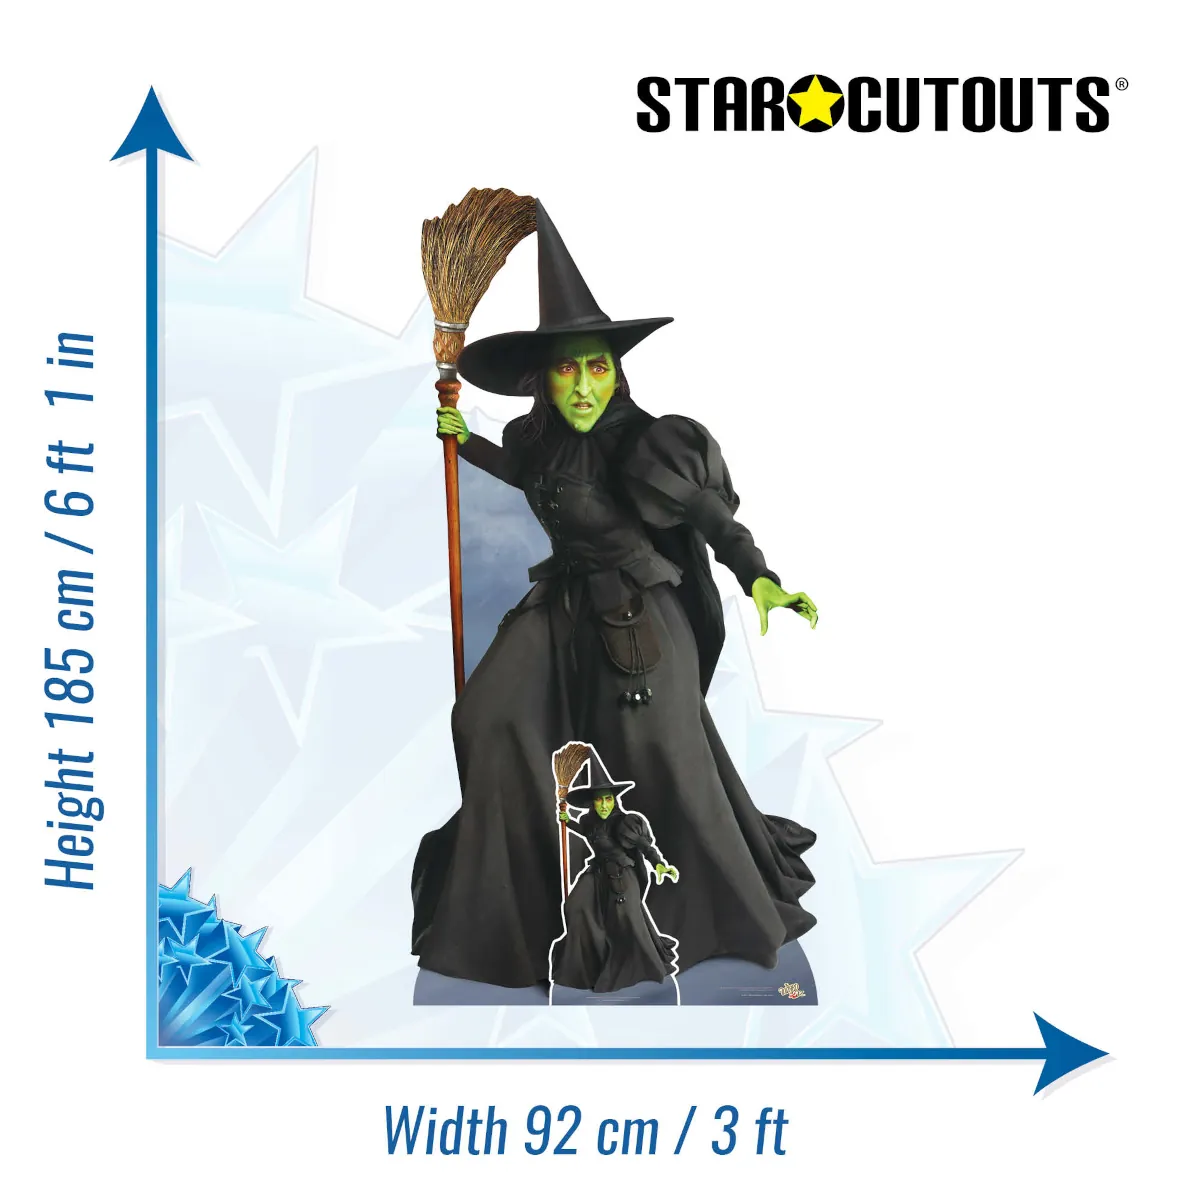 SC4225 Wicked Witch of the West (The Wizard of Oz) Lifesize + Mini Cardboard Cutout Standee Size